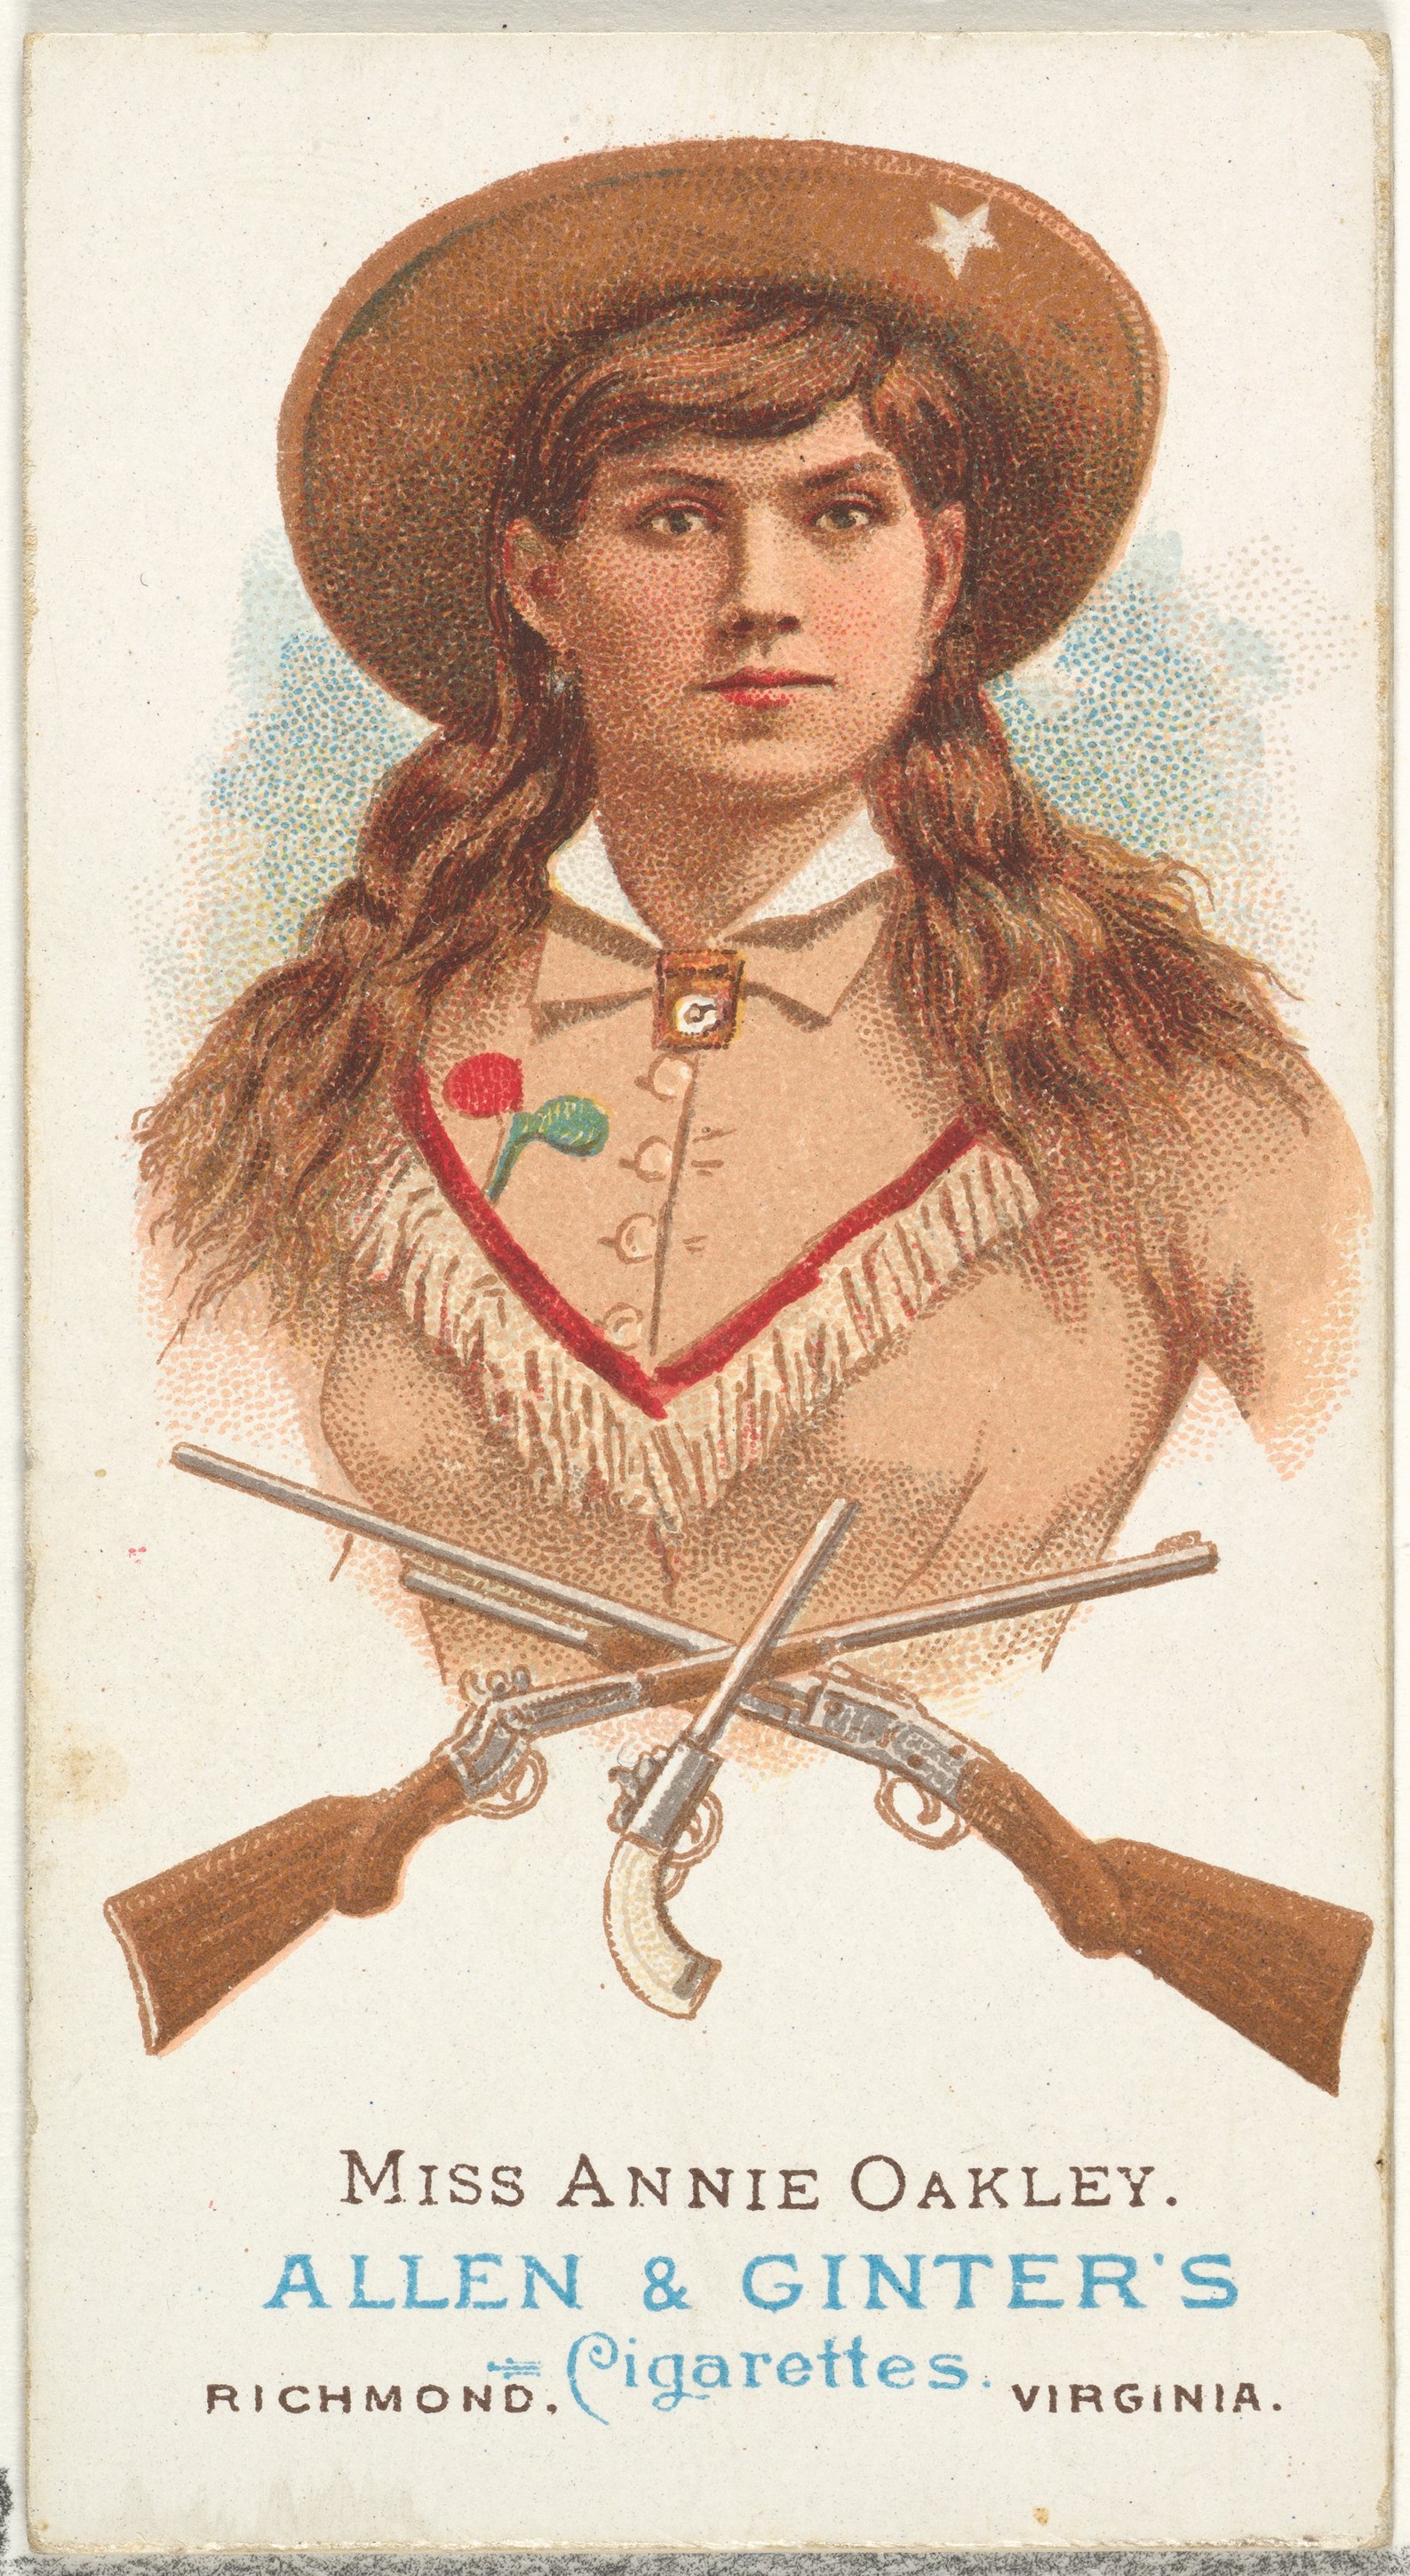 Allen & Ginter | Miss Annie Oakley, Rifle Shooter, from World's Champions,  Series 1 (N28) for Allen & Ginter Cigarettes | The Metropolitan Museum of  Art